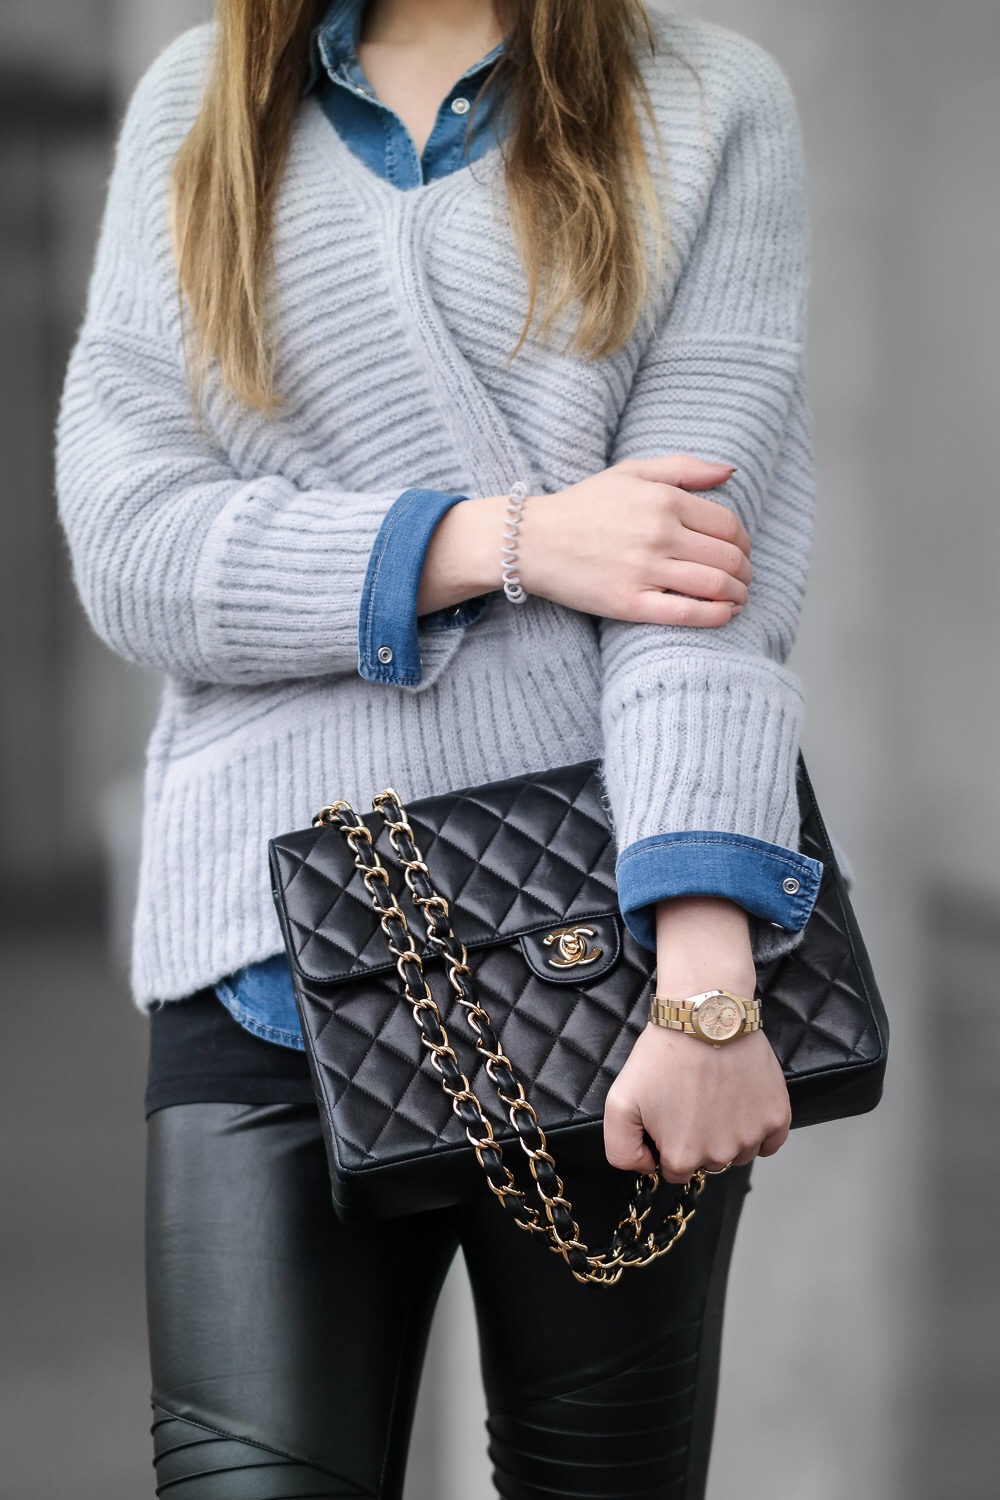 Casual-Streetstyle-Look-Chanel-Bag-Fashion-Blog-München